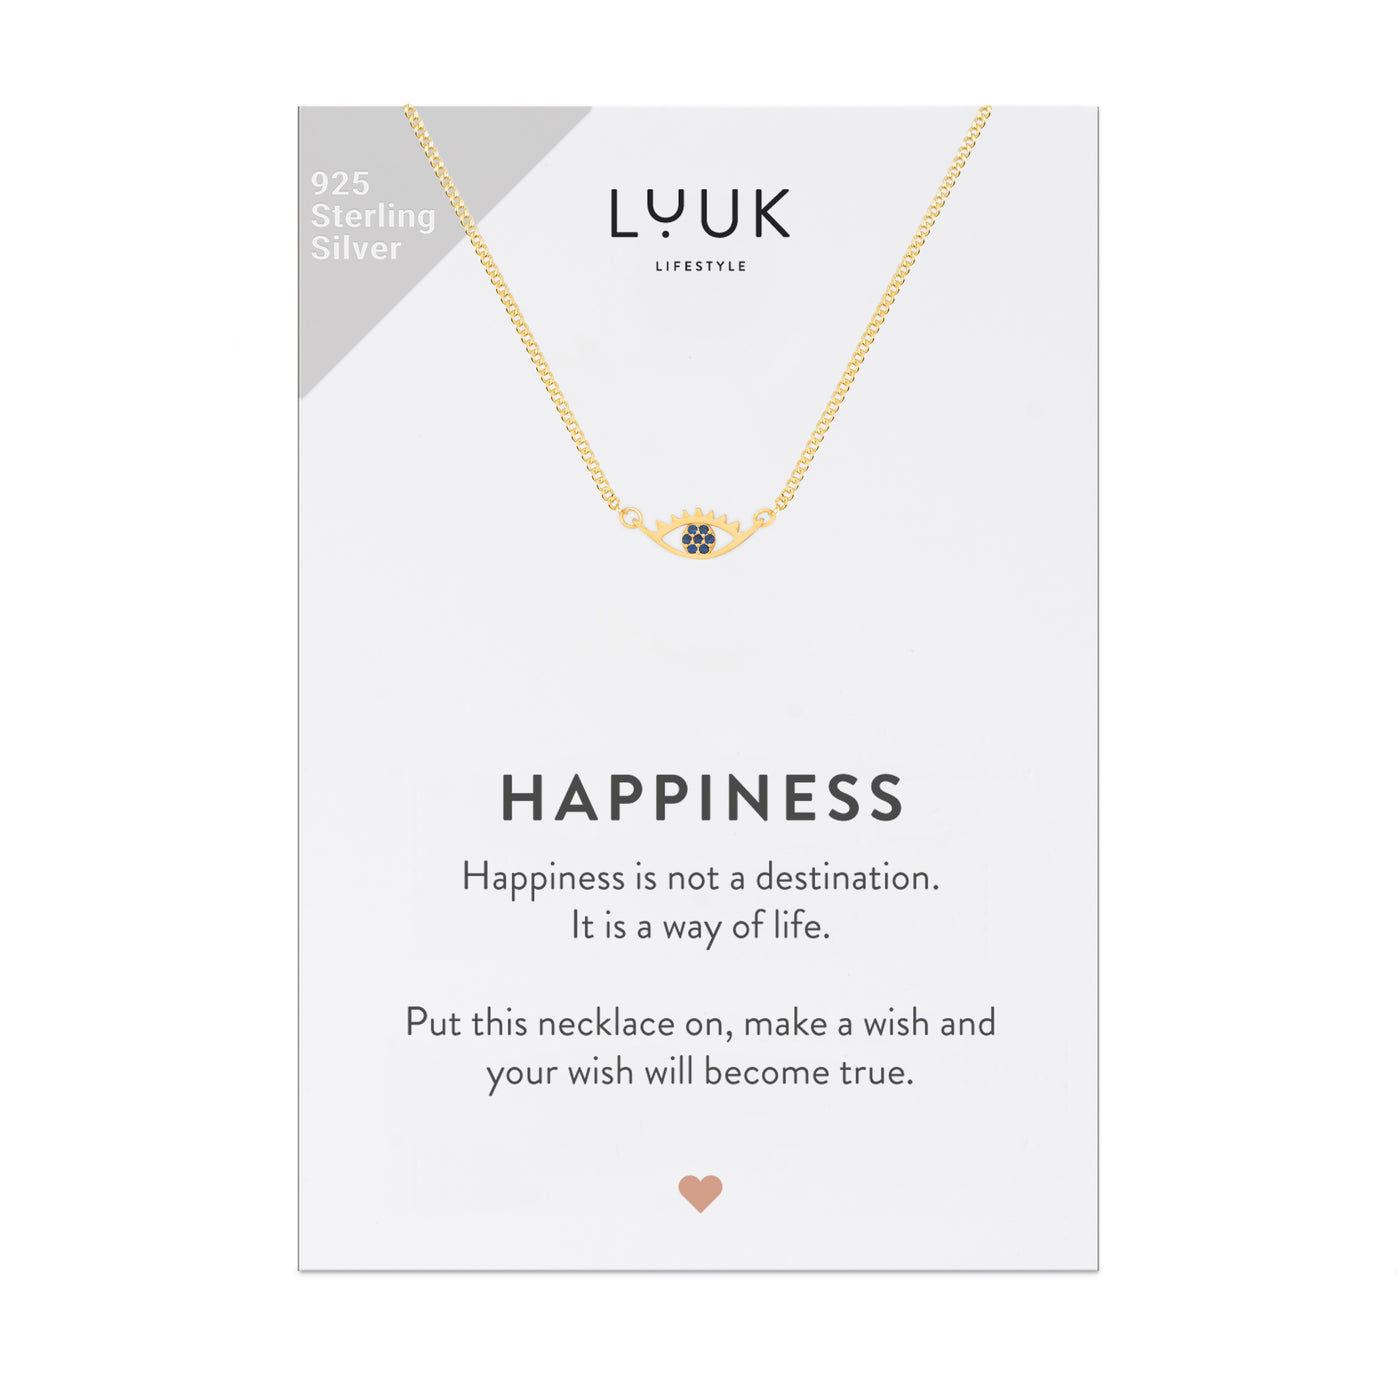 Sterling silver necklace with Buddha eye pendant and Happiness greeting card